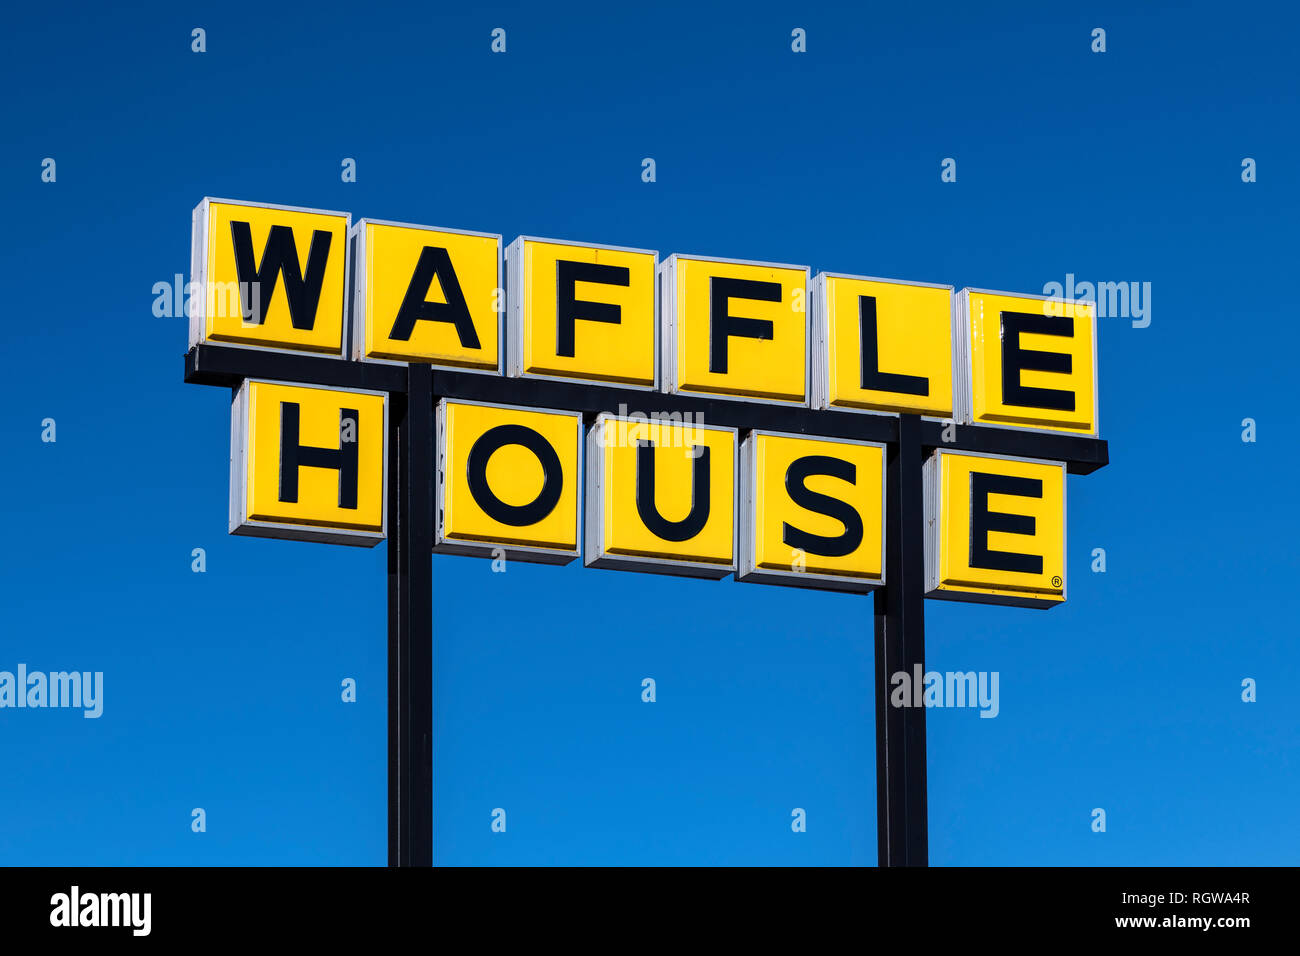 Waffle House is an American restaurant chain predominately located in the southern states. Stock Photo